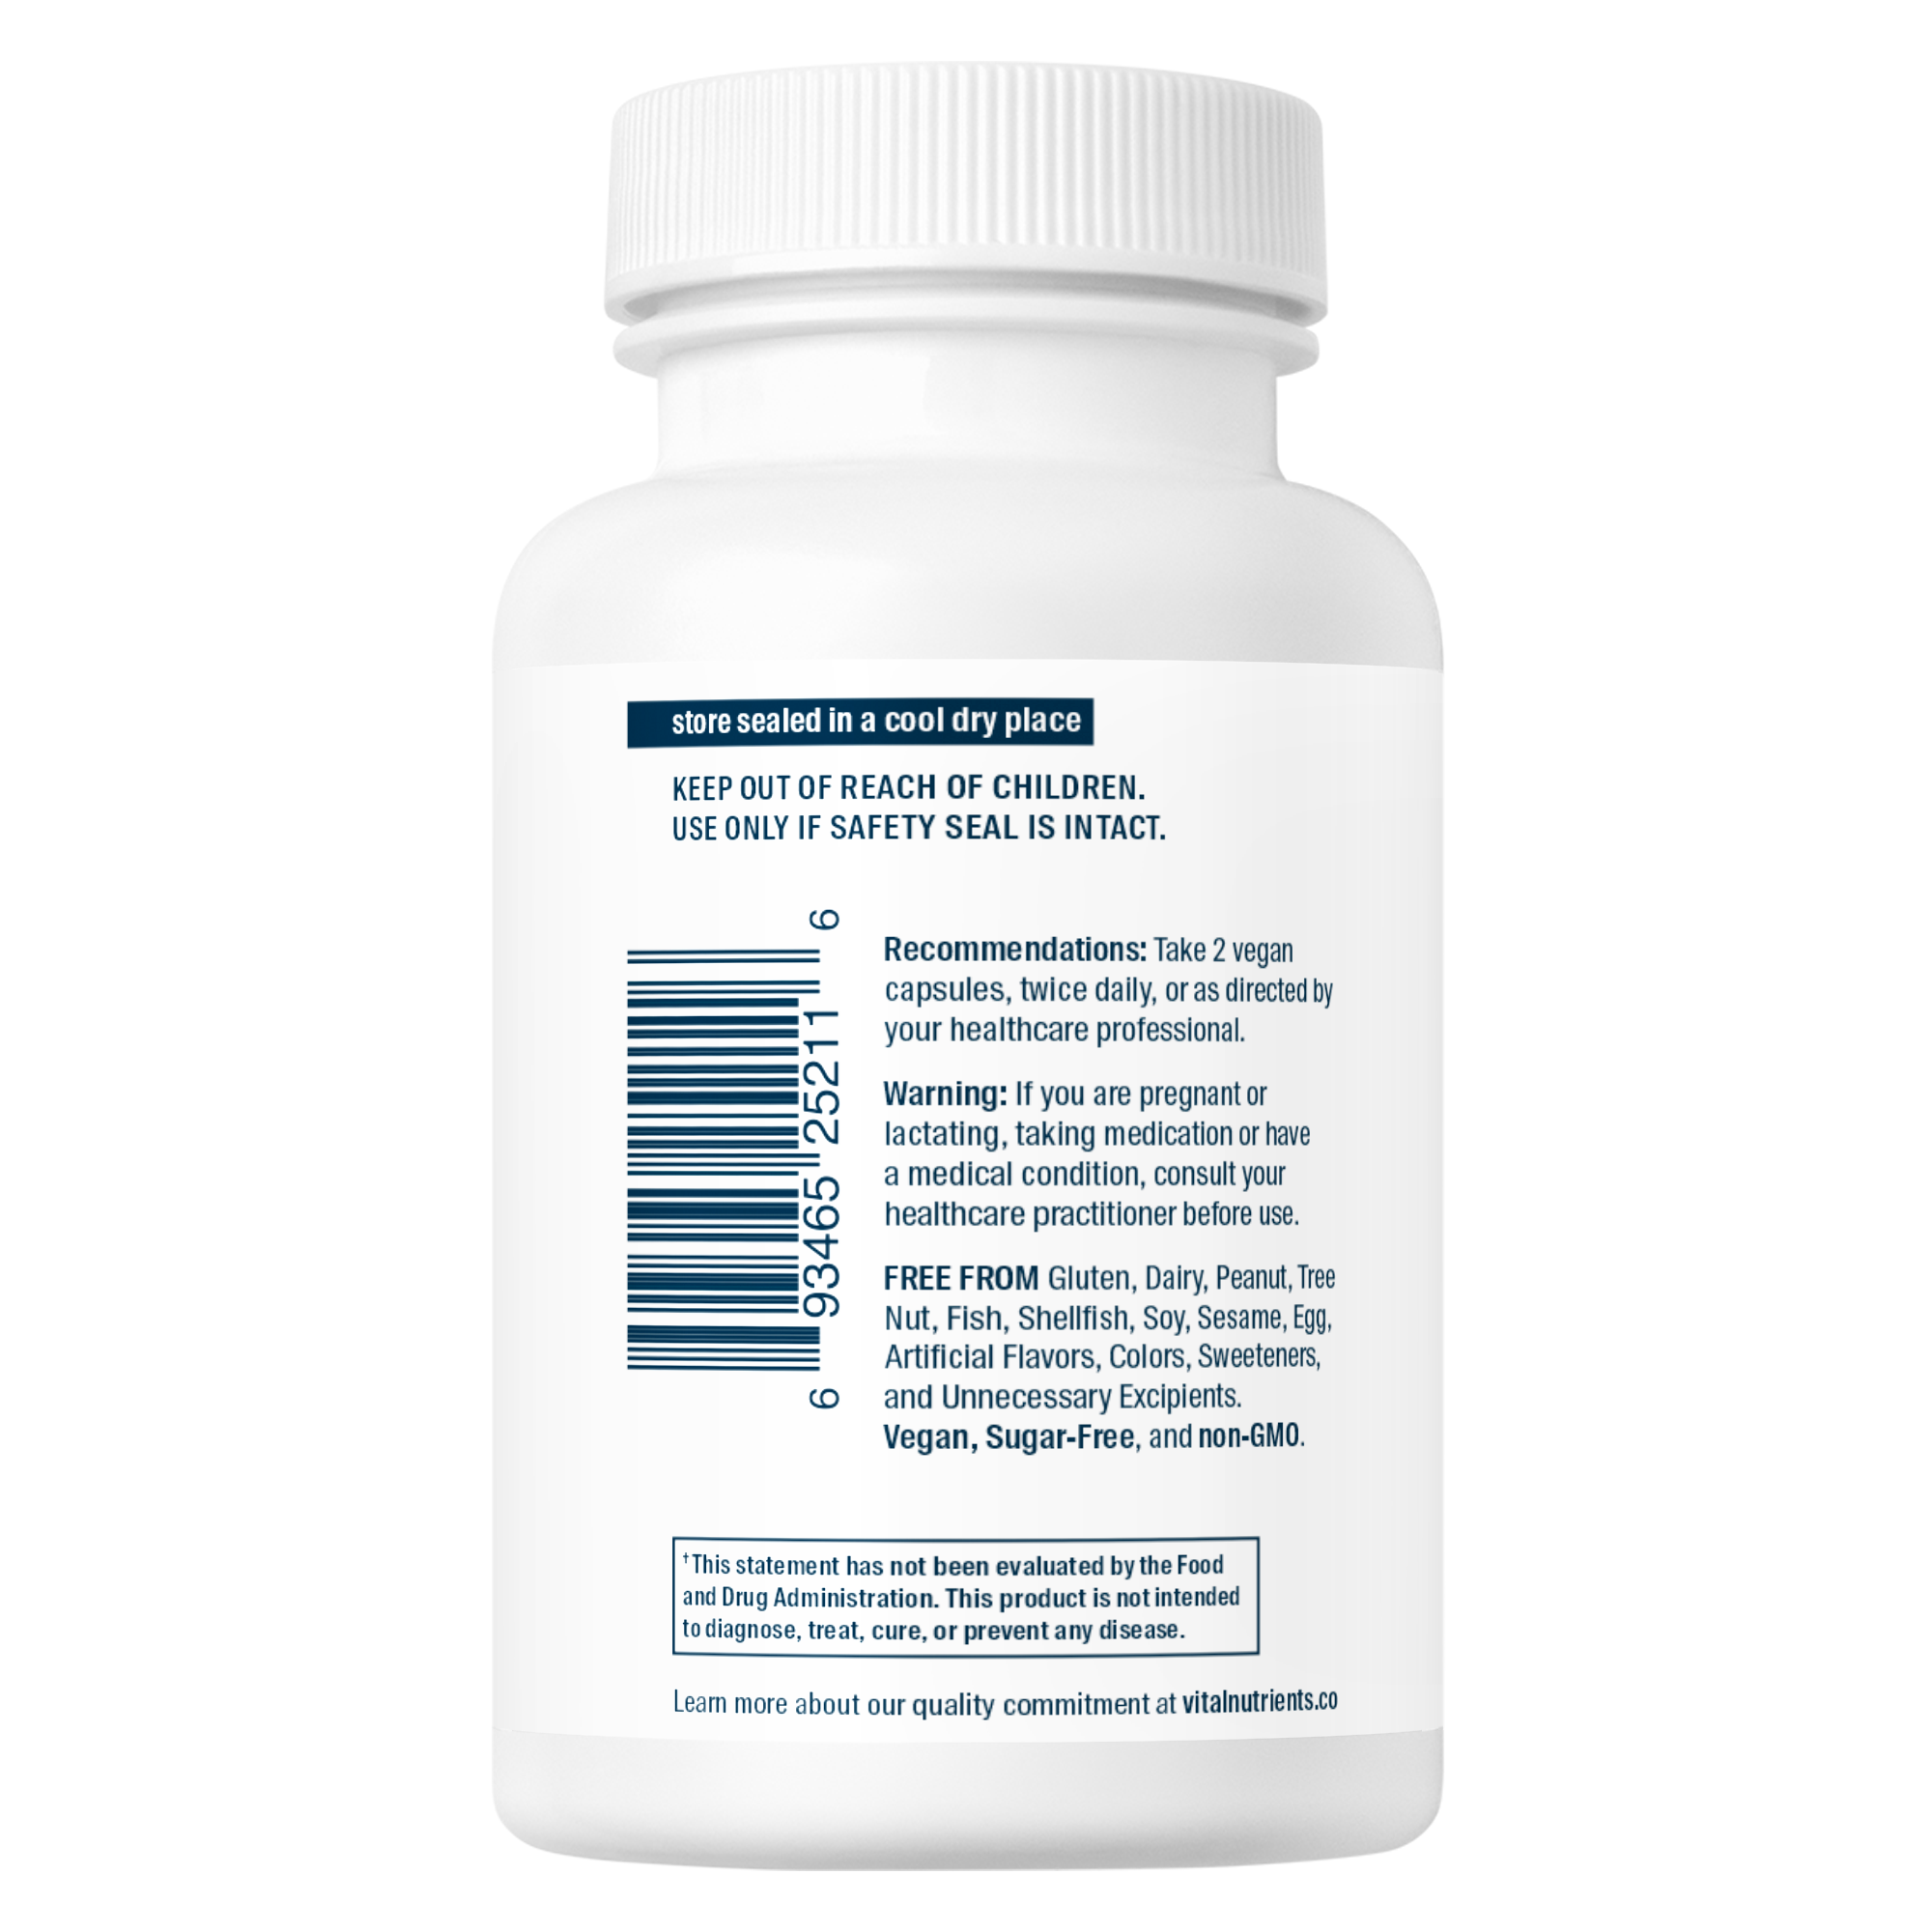 Liver Support II (with Picrorhiza)